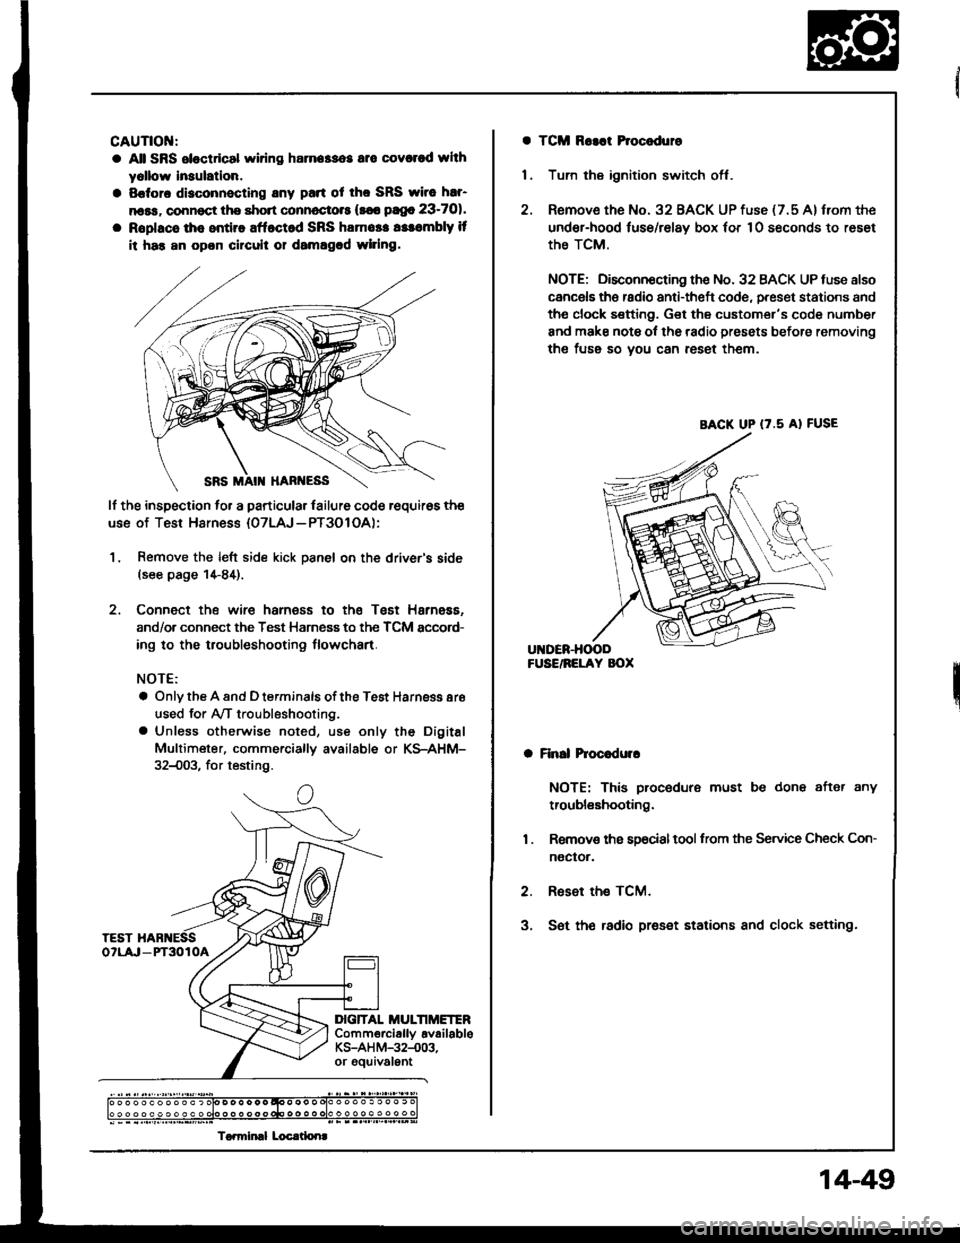 HONDA INTEGRA 1994 4.G User Guide CAUTIOI{:
a All SRS eloctdcal wiring harna$os are covcred whh
yollow lnaulation.
a Sofora disconnecting any pan ot tho SRS wirc har
n6ss, connoct the short connoctots (s€6 pago 23-701.
a Roplacs th